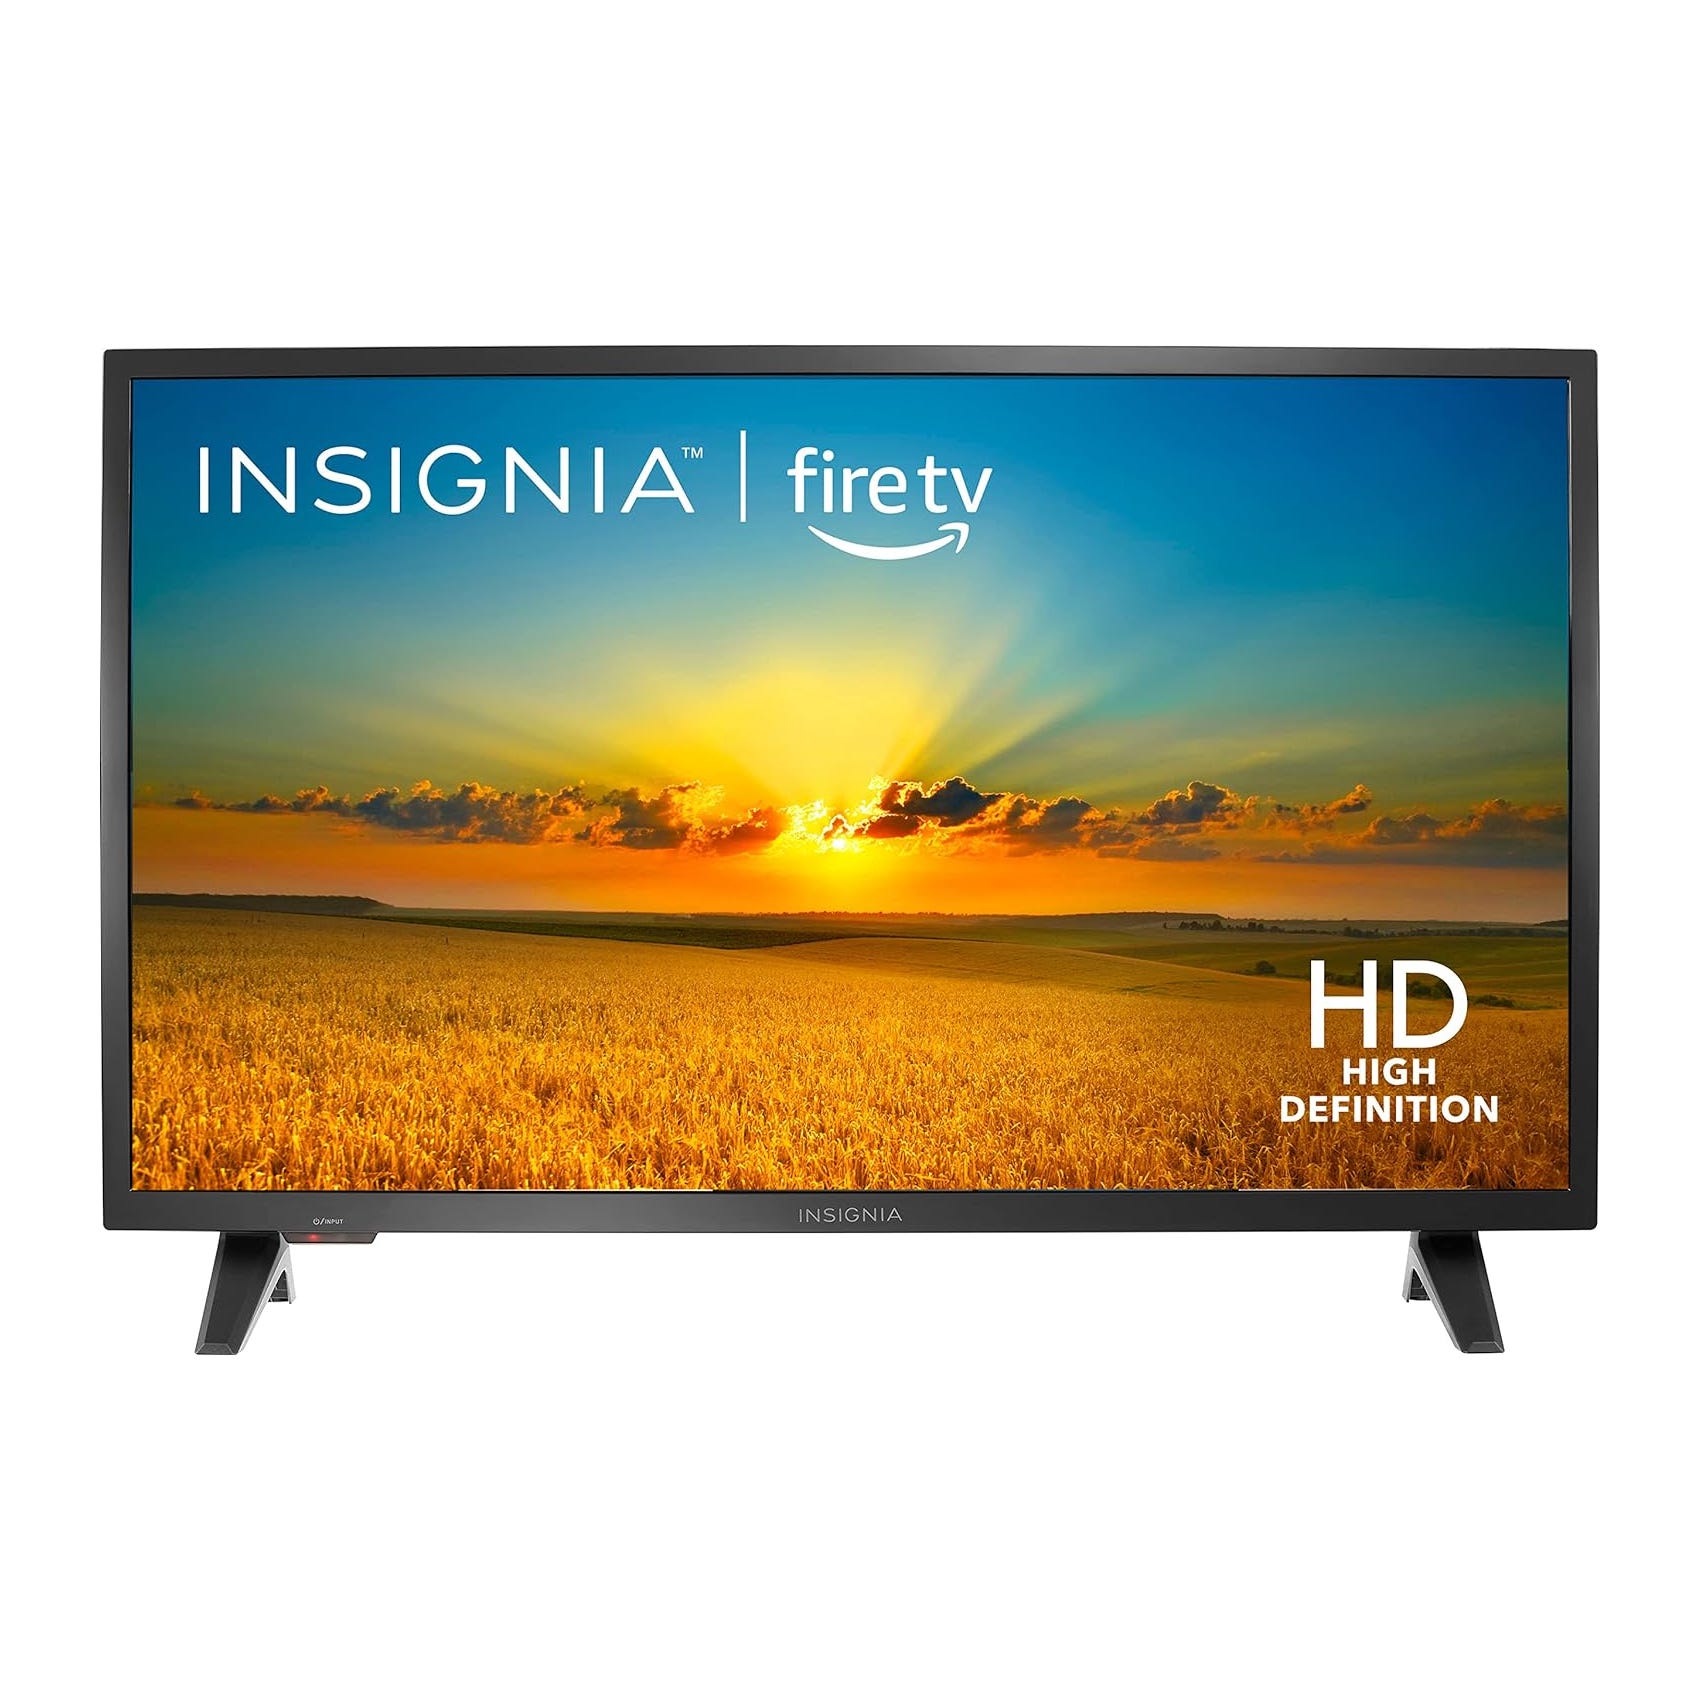 An Insignia television with Fire TV capabilities displaying a sunset scene.